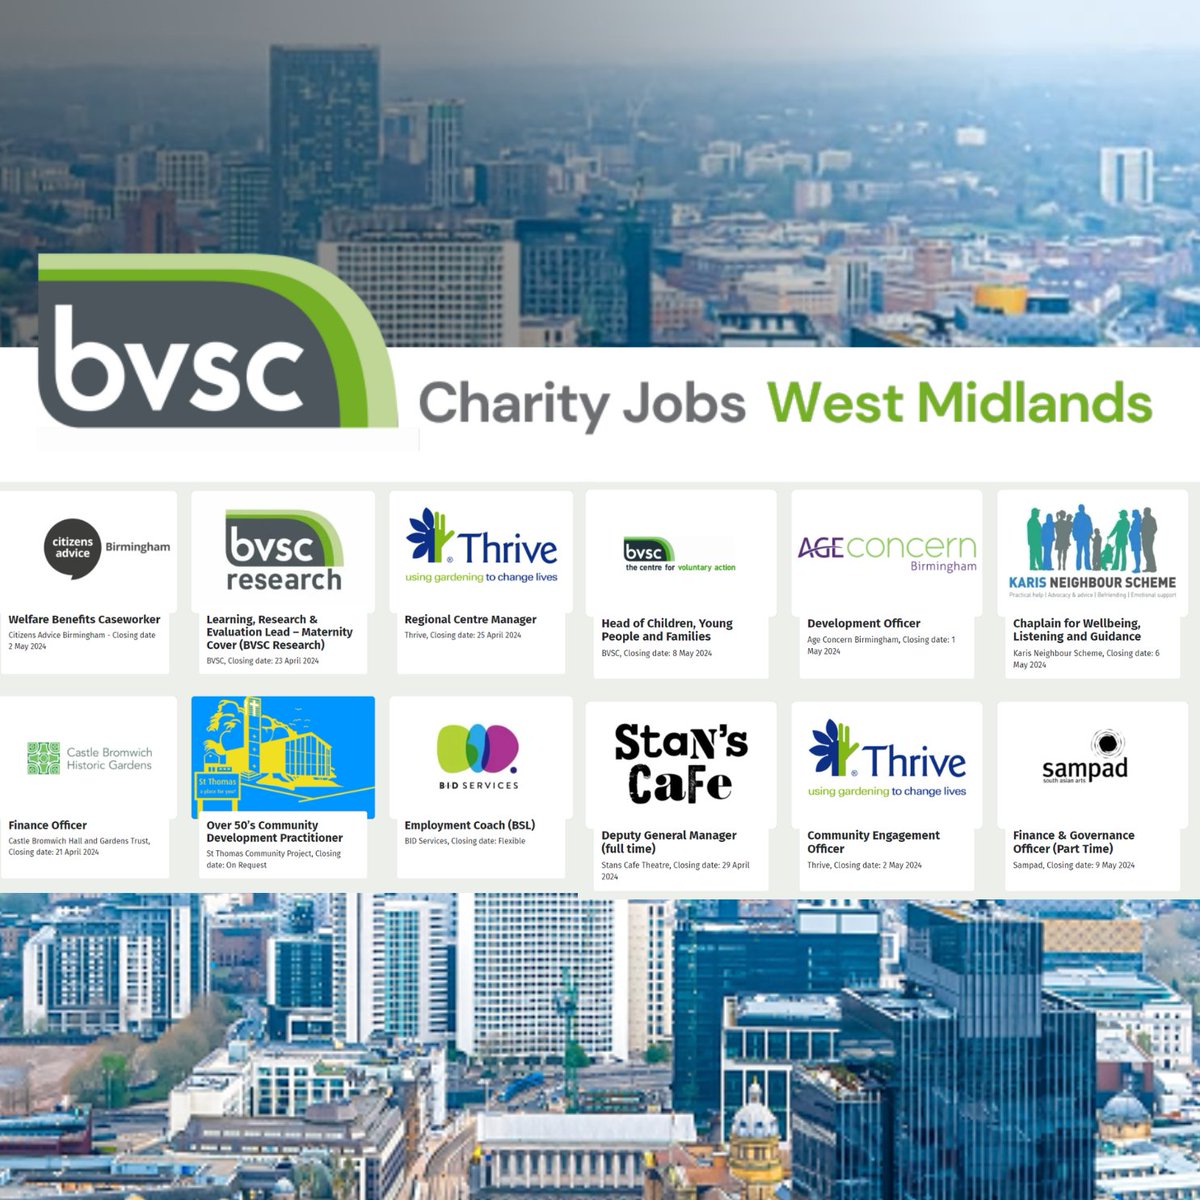 Find a career with purpose, working for a #charity or not-for-profit in the #WestMidlands region. #CharityJobs #birmingham #careers #jobsearch bvsc.org/bvsc-charity-j…